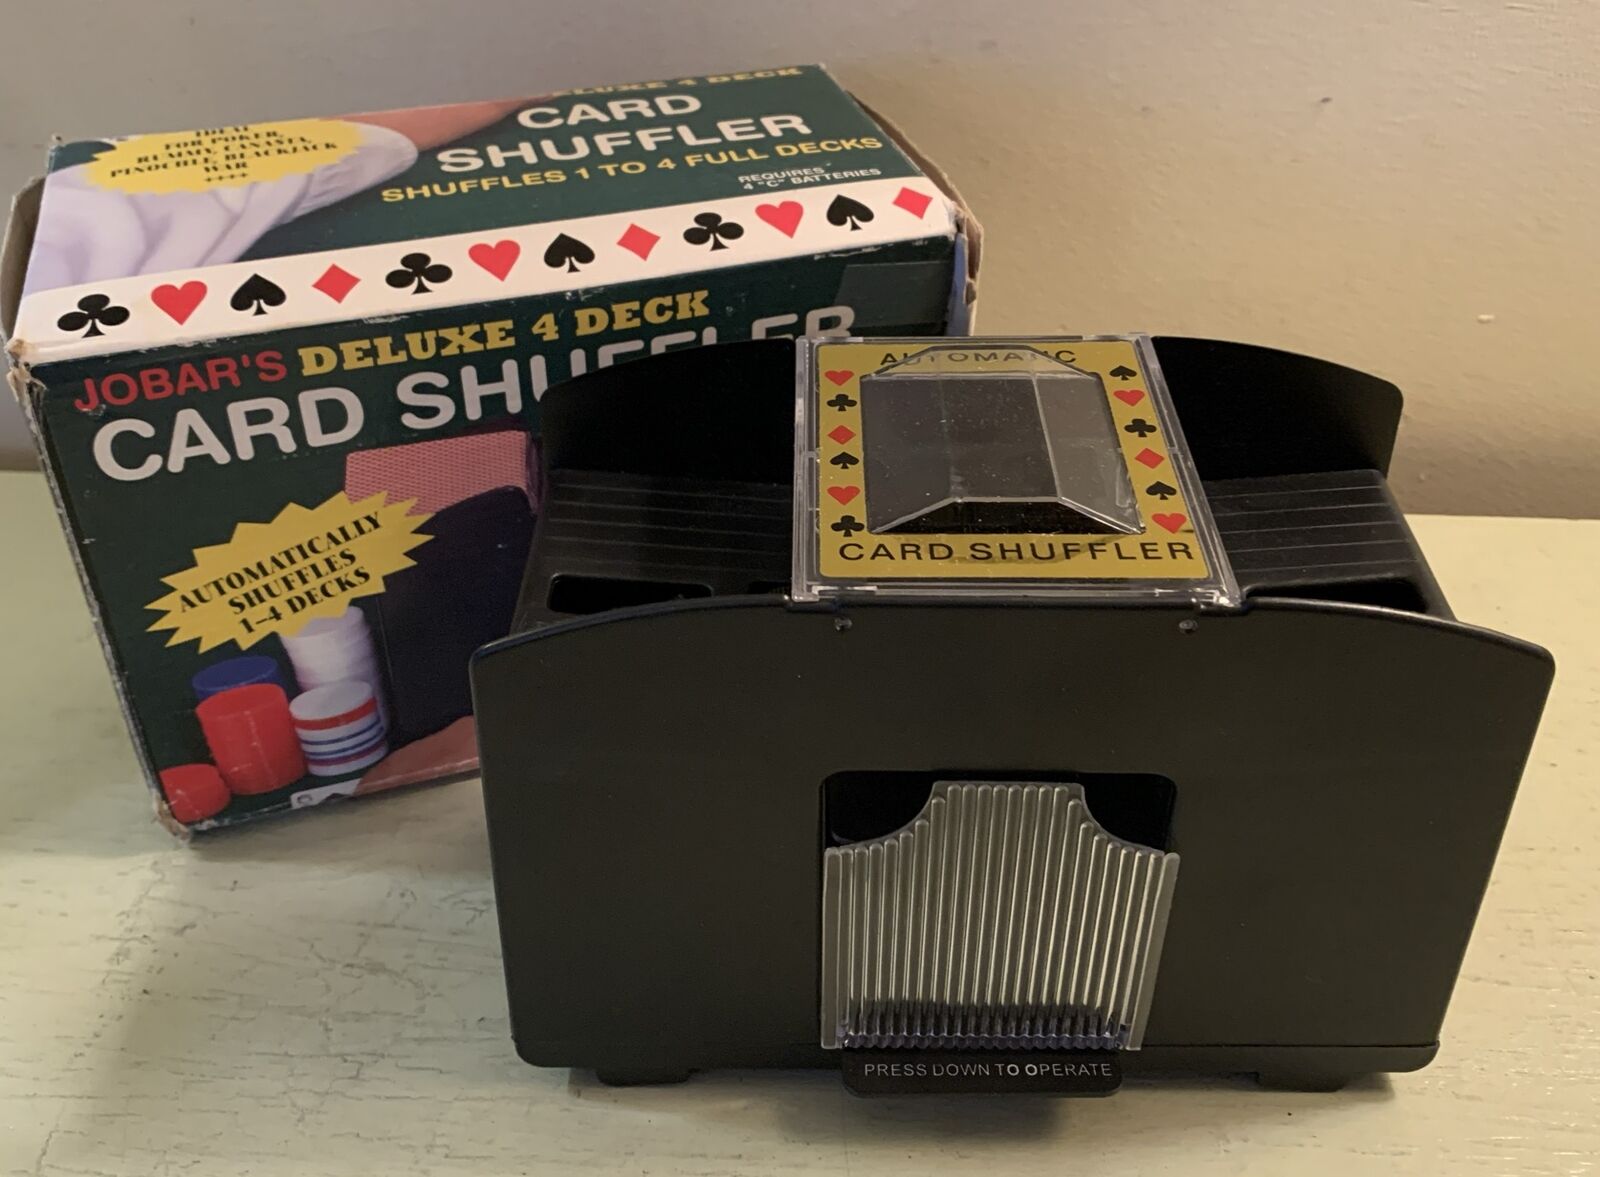 Vintage JOBAR'S DELUXE AUTOMATIC 4 DECK CARD SHUFFLER Works